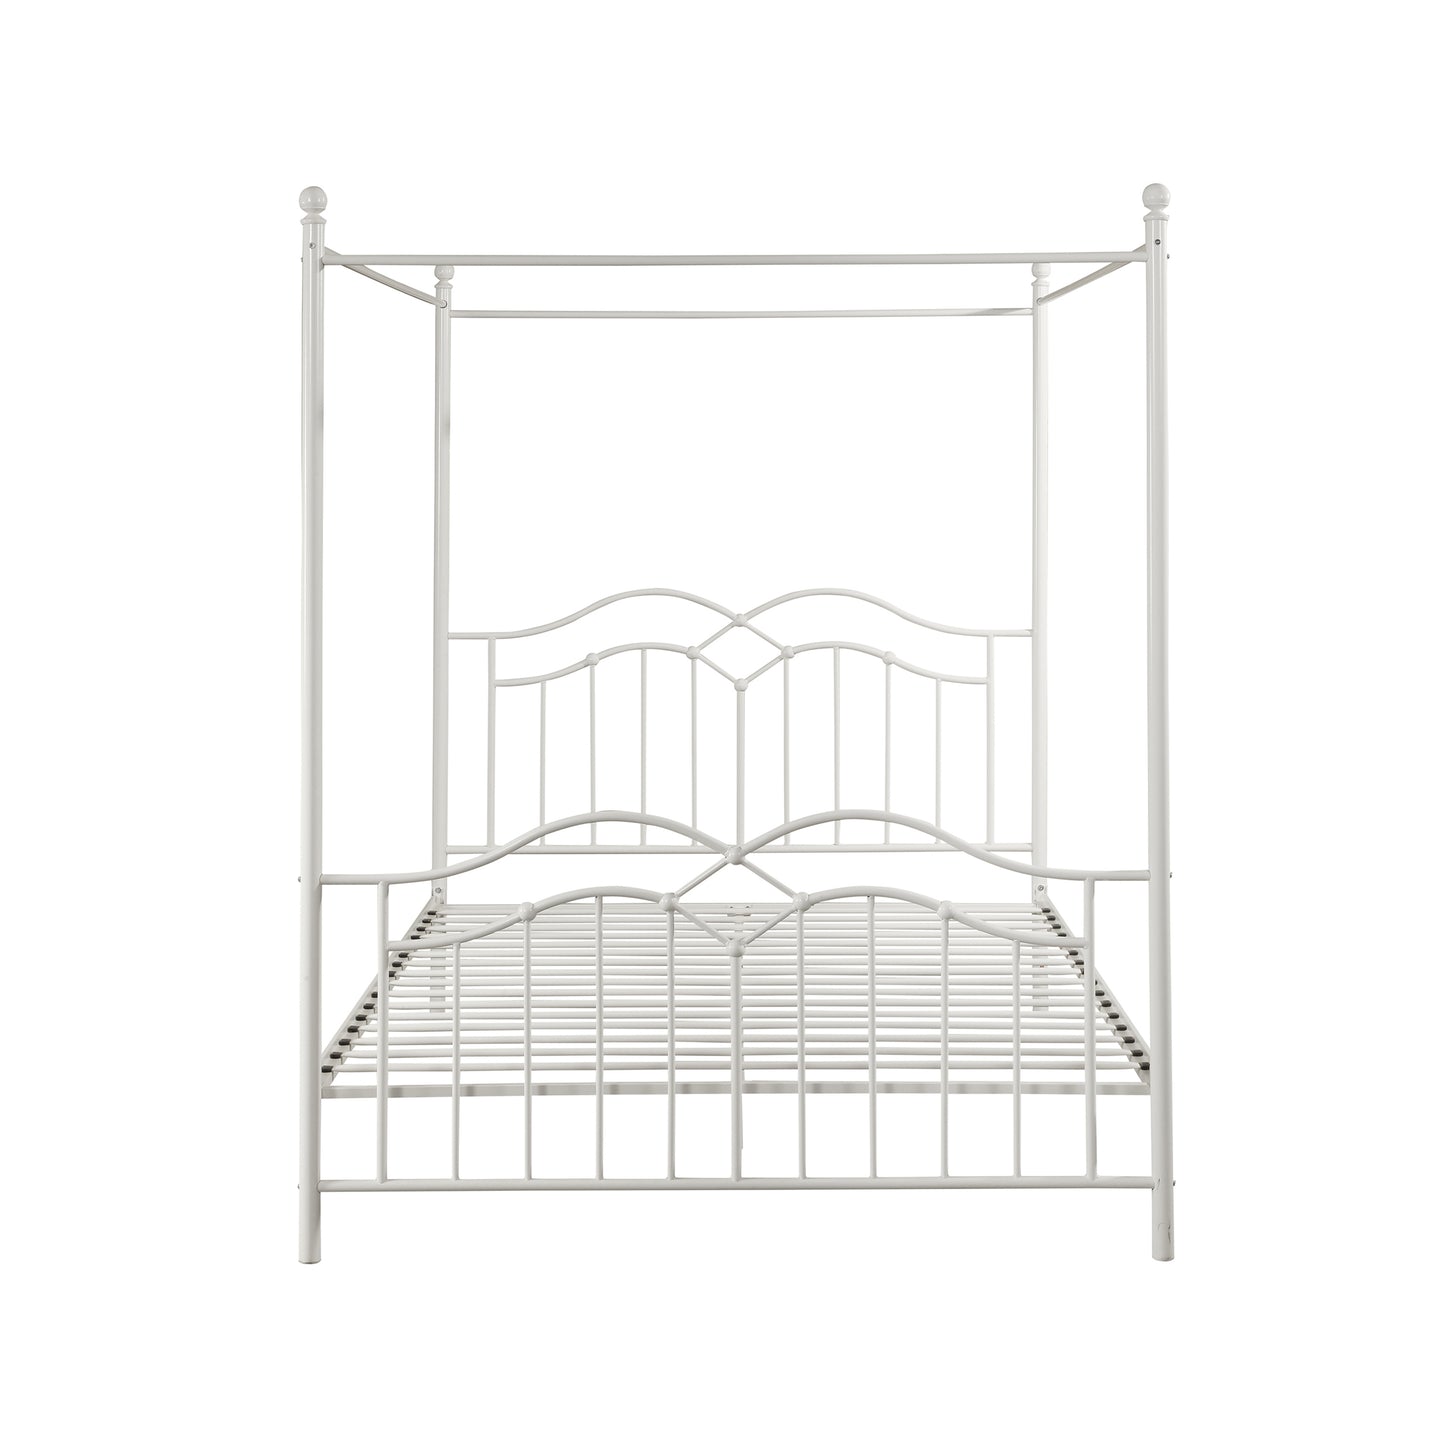 Simona Traditional Iron Canopy Queen Bed Frame